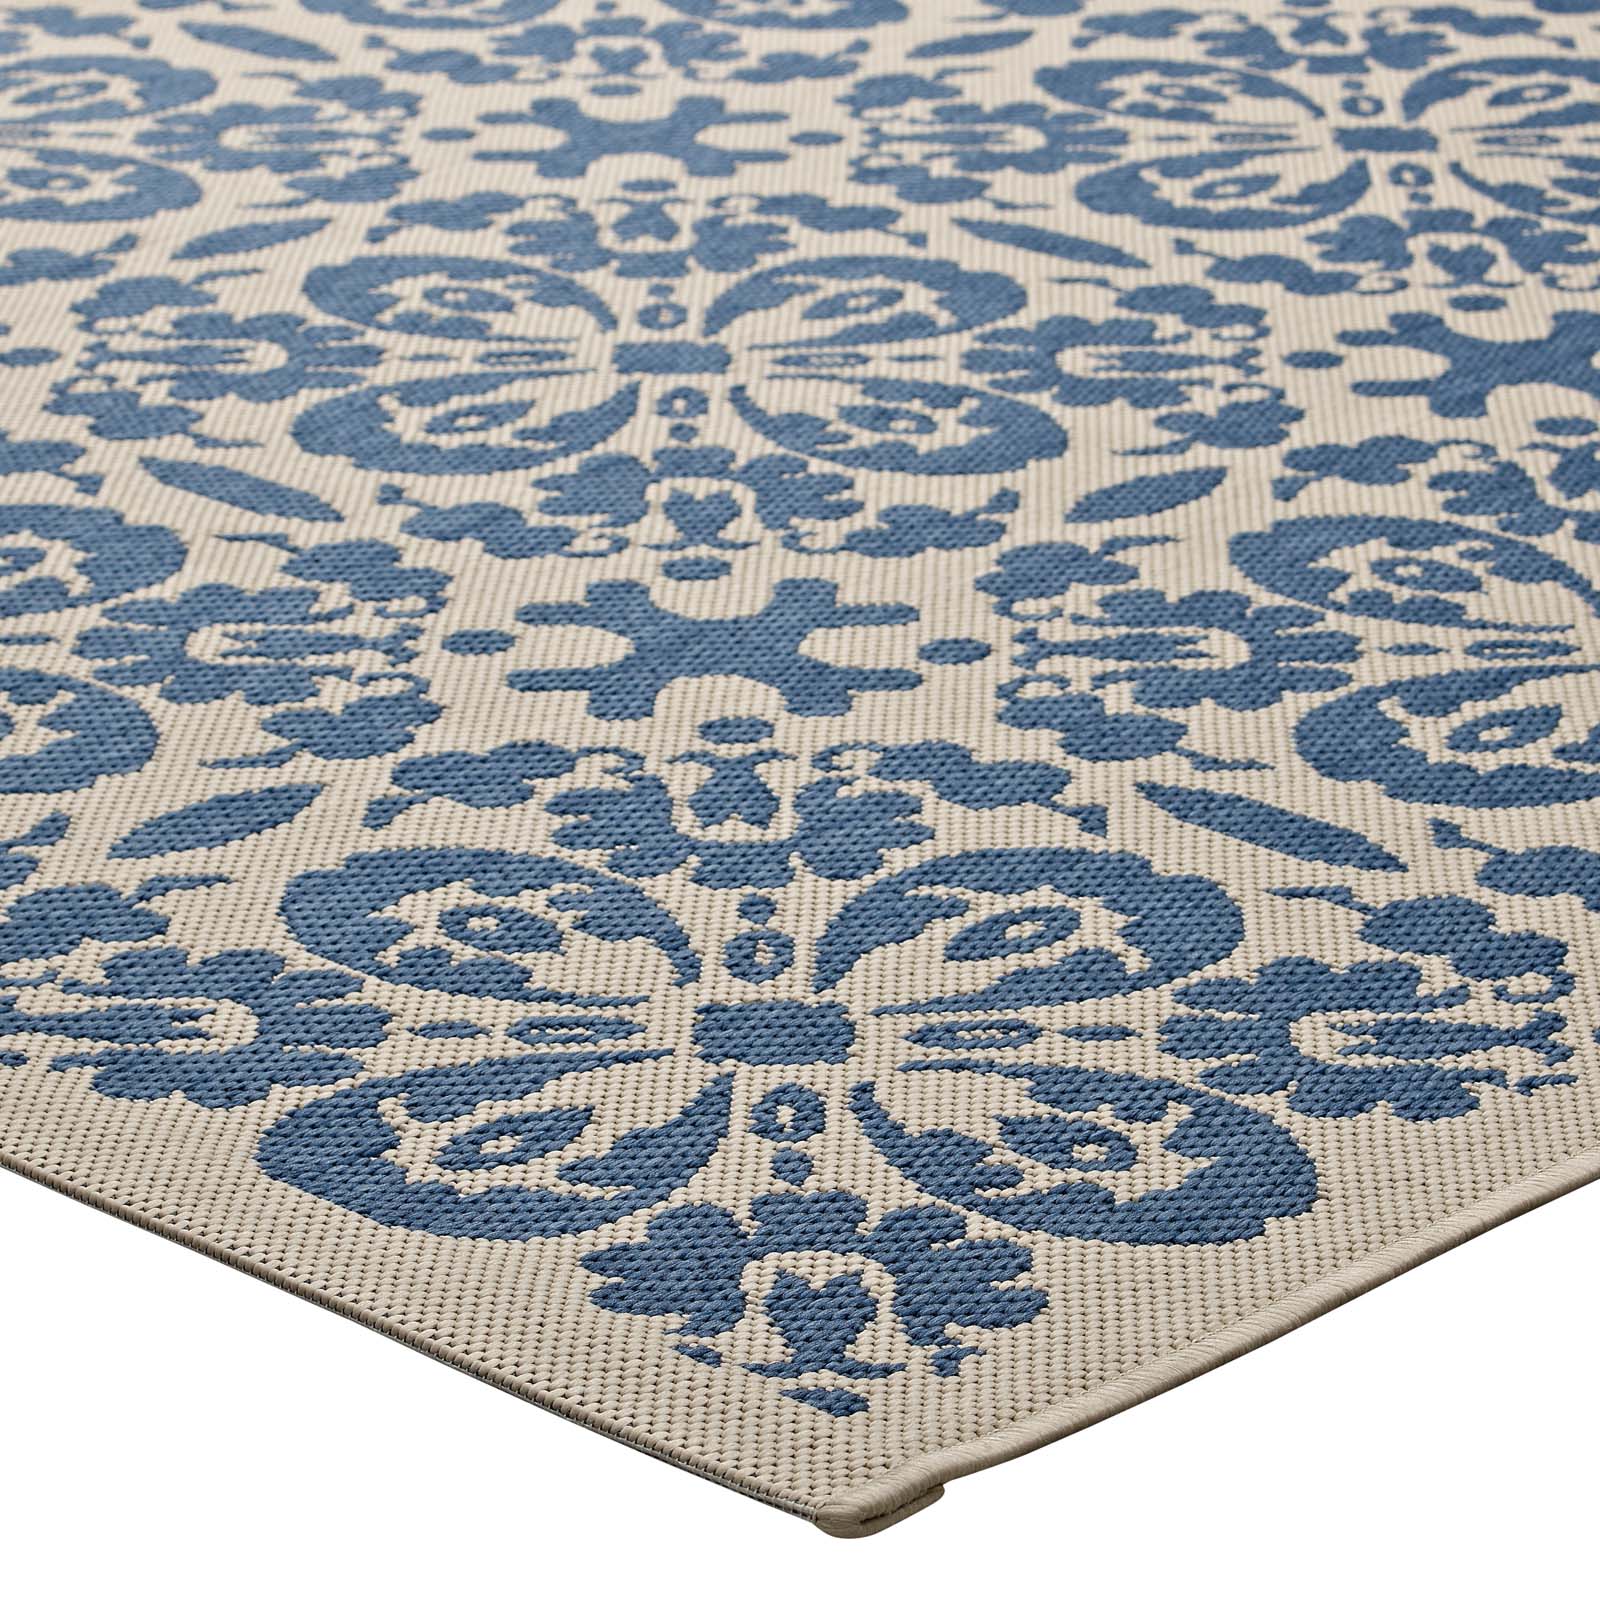 Modway Outdoor Rugs - Ariana Vintage Floral Trellis 5x8 Indoor and Outdoor Area Rug Blue & Beige